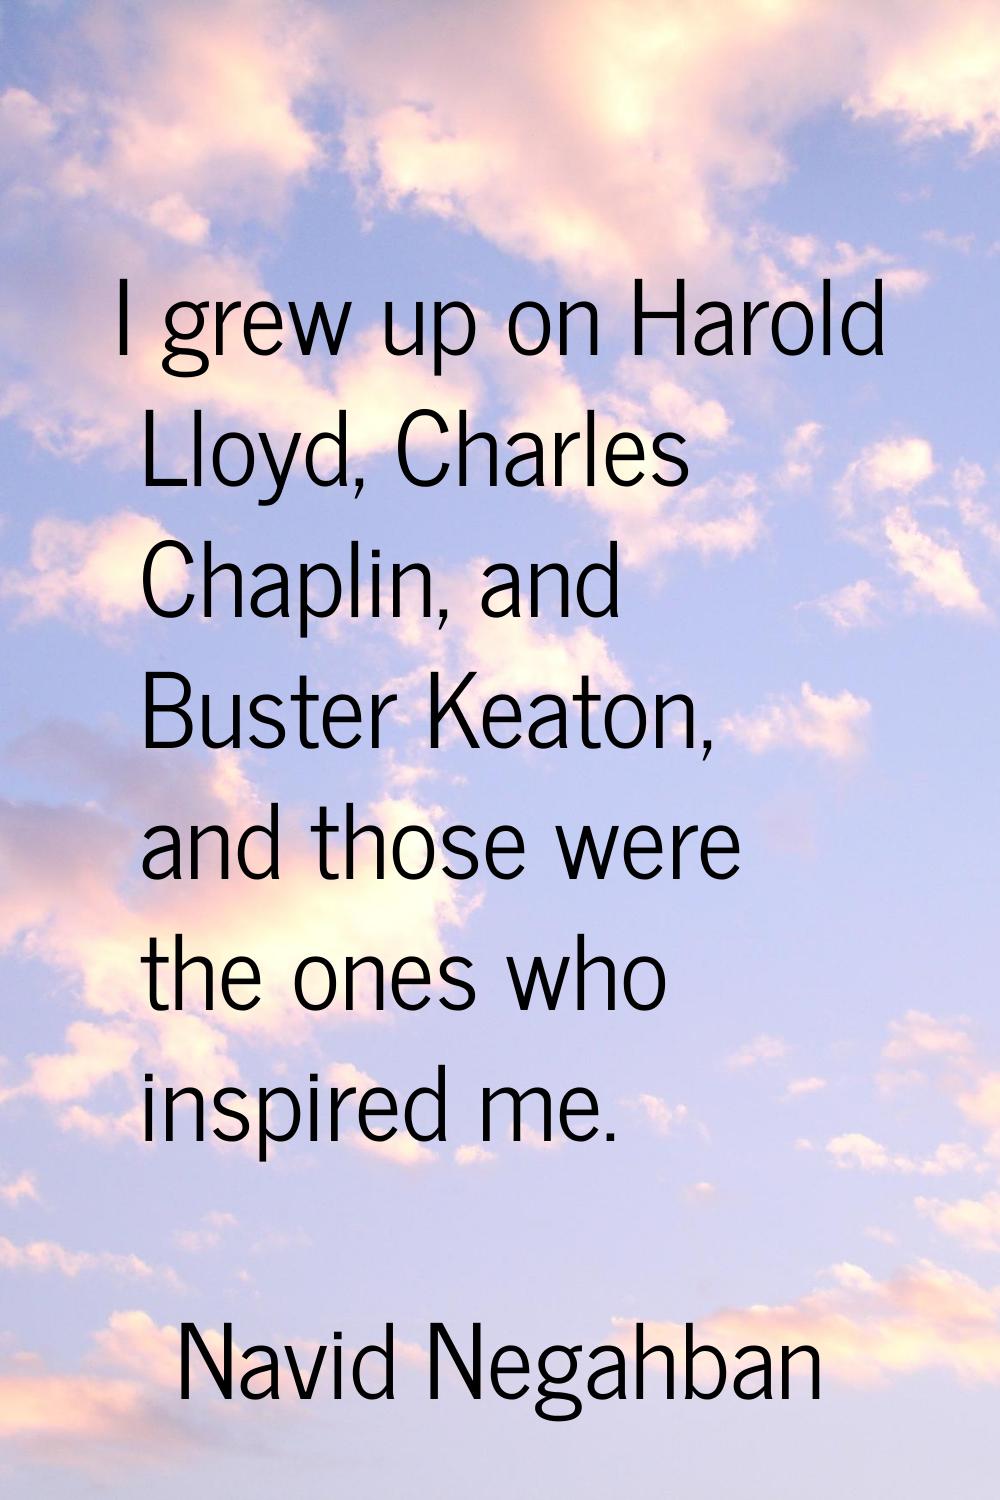 I grew up on Harold Lloyd, Charles Chaplin, and Buster Keaton, and those were the ones who inspired